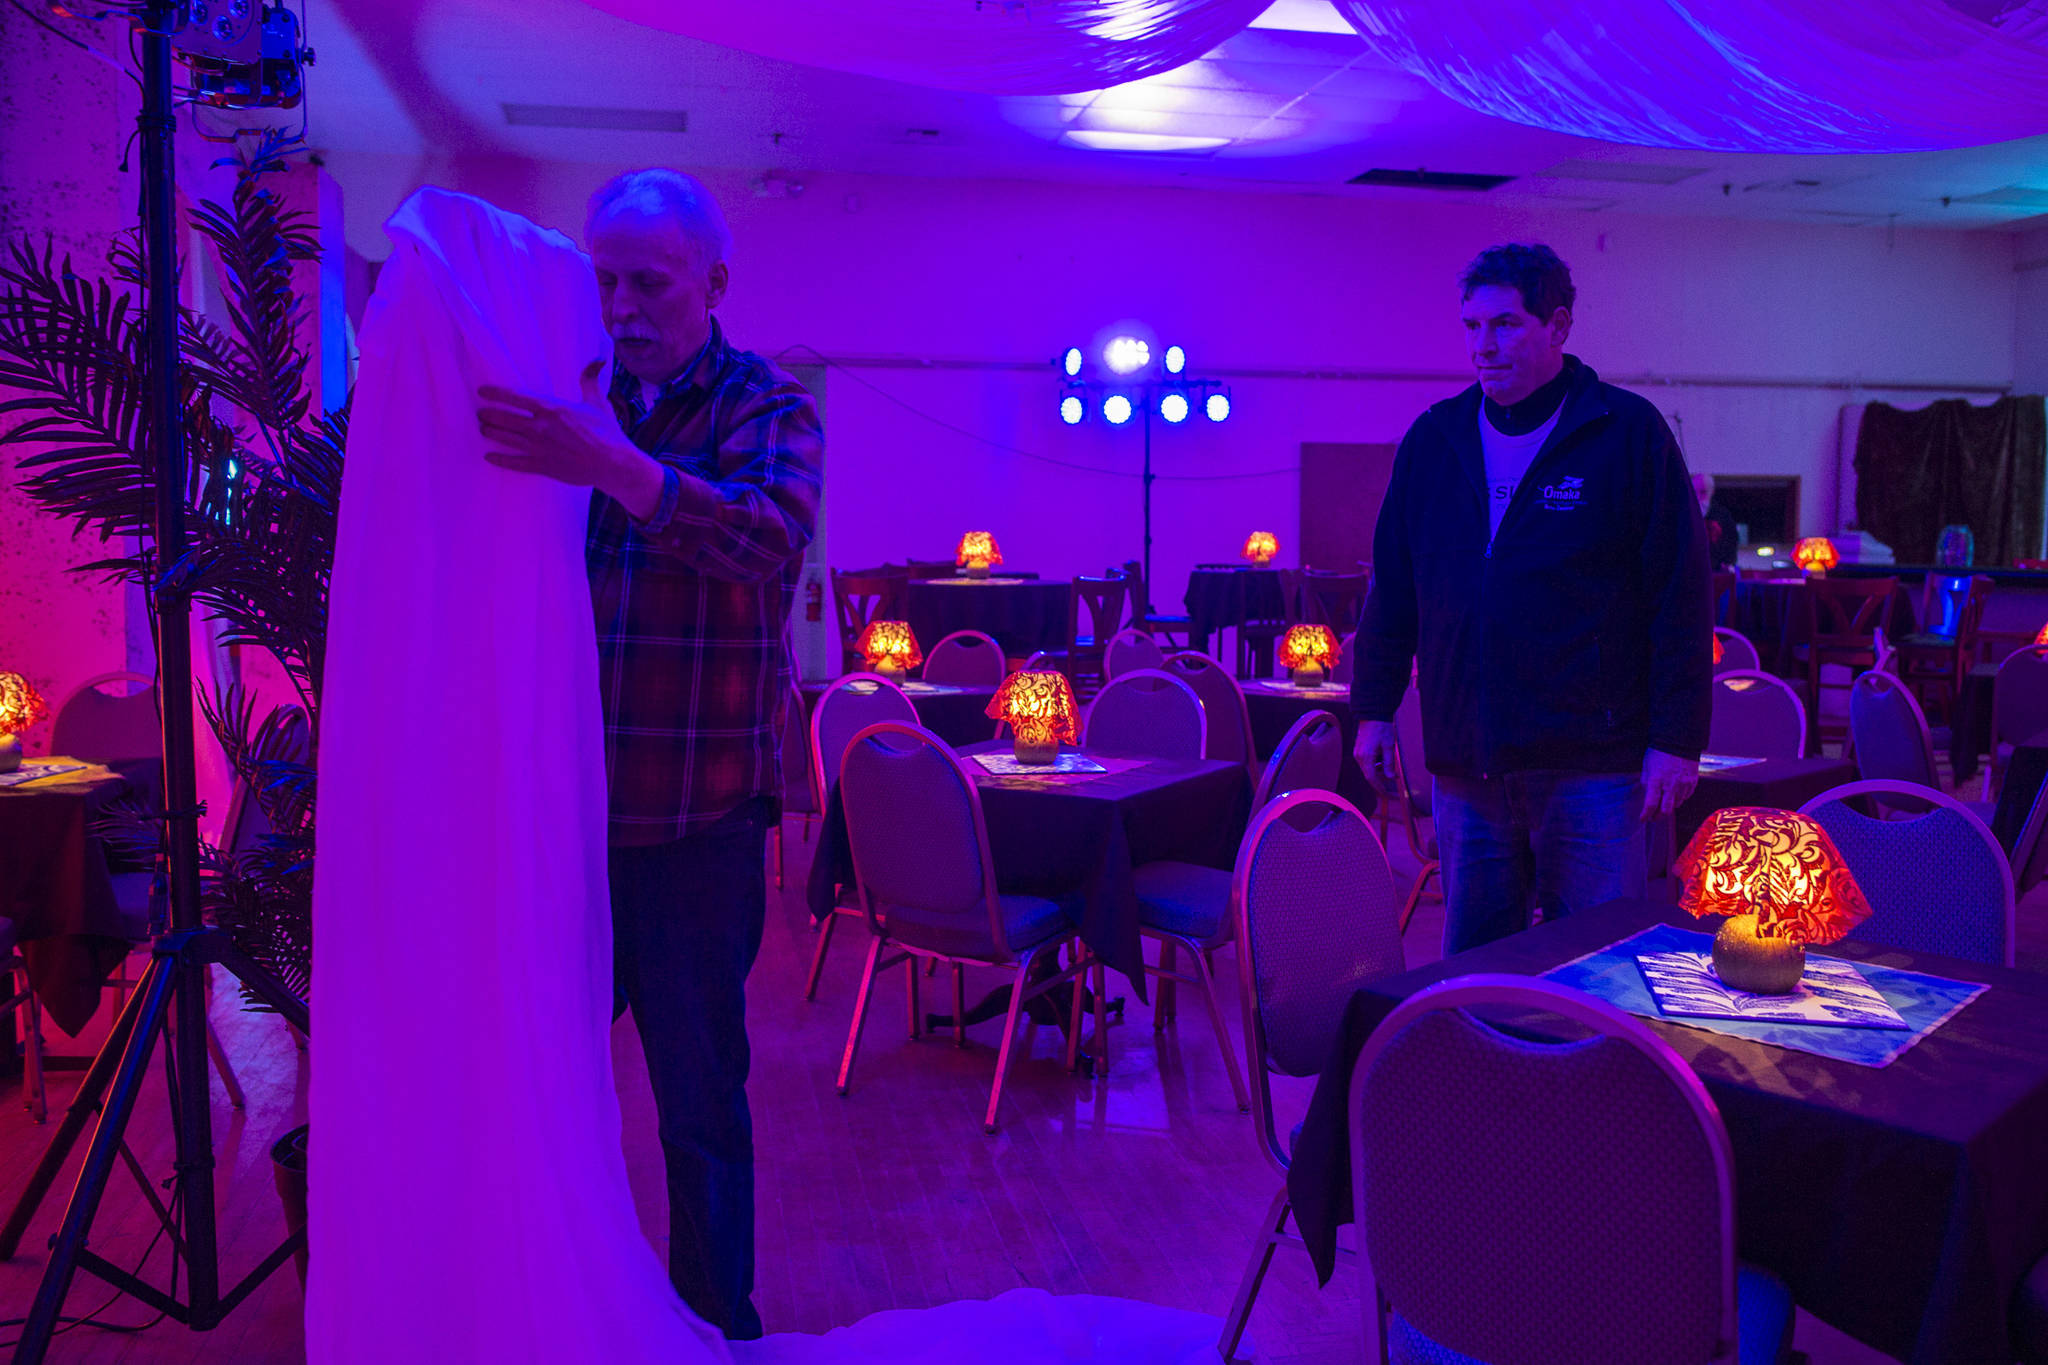 Juneau Lyric Opera boardmember John Clough, right, watches as set designer Nathan Rodda creates Rick’s Cafe Americain at the Rockwell Ballroom for “Here’s Looking at You, Casablanca” on Monday, Nov. 5, 2018. The show is a presentation by the Juneau Lyric Opera and Gold Town Nickelodeon. (Michael Penn | Juneau Empire)